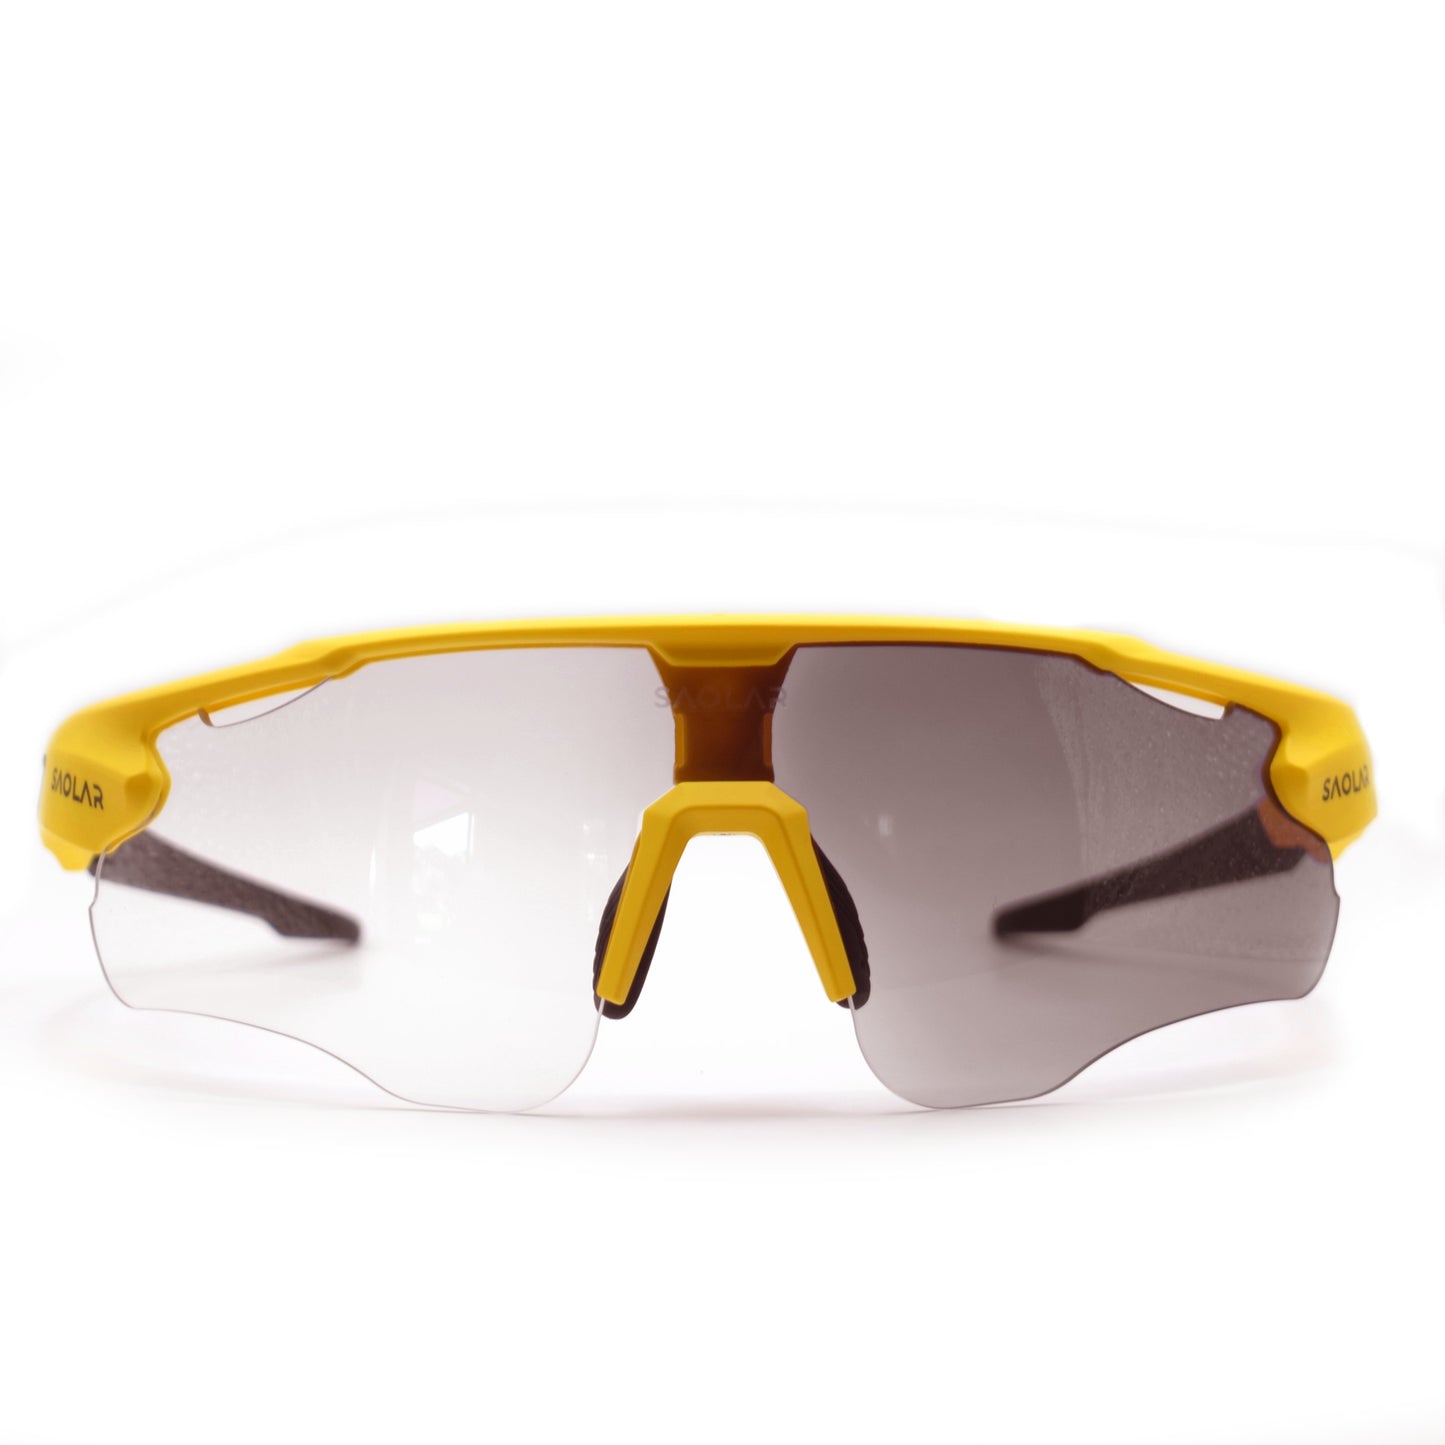 Helios Photochromic Cycling Glasses - Front Photochromic example